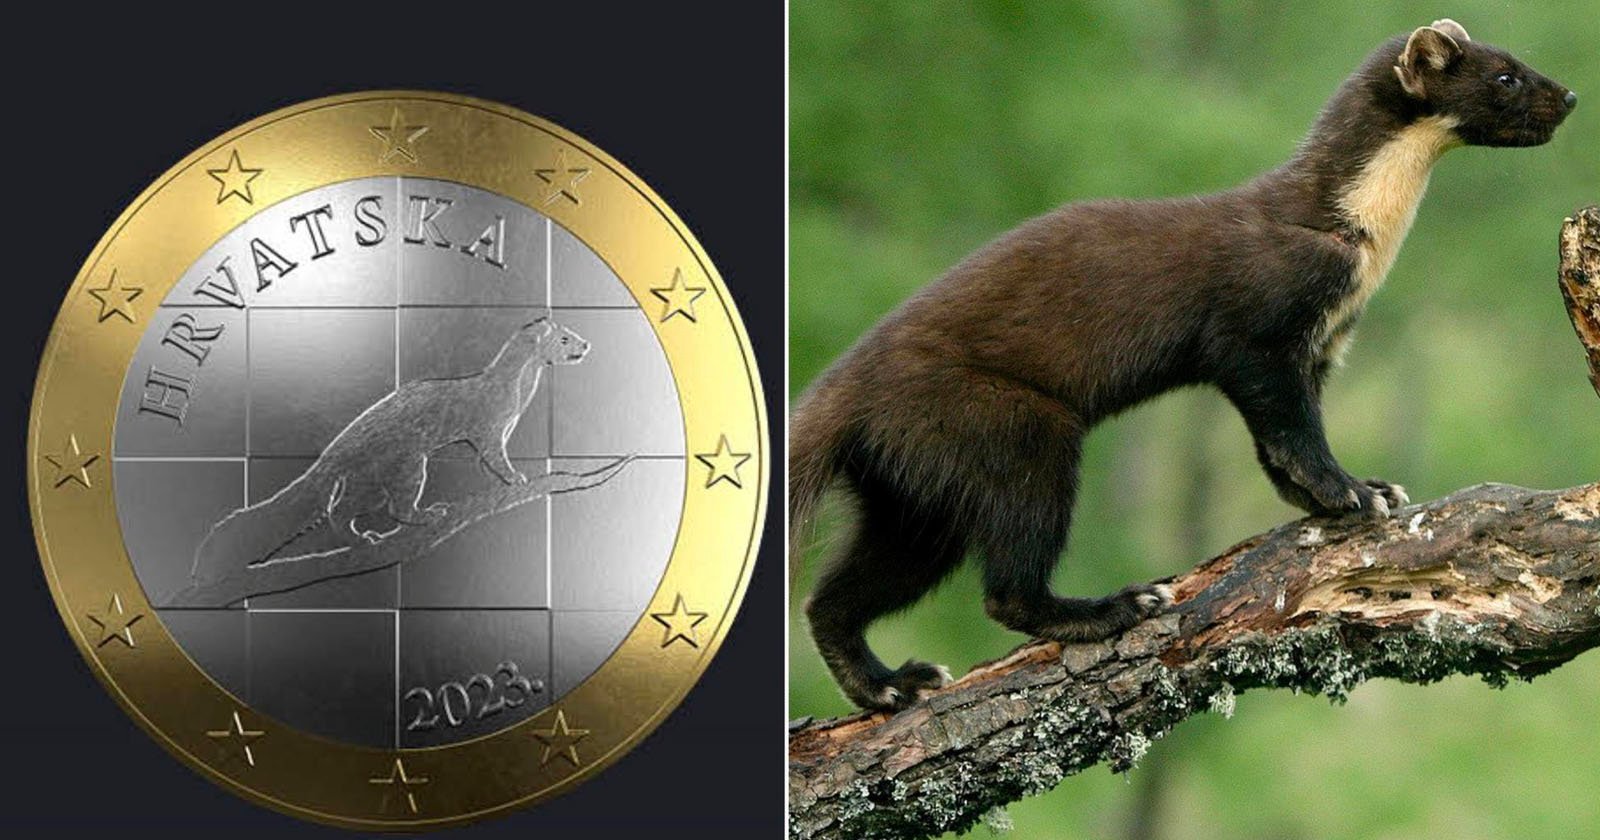 Croatian Euro Coin Design Scrapped After Photographer Cries Foul